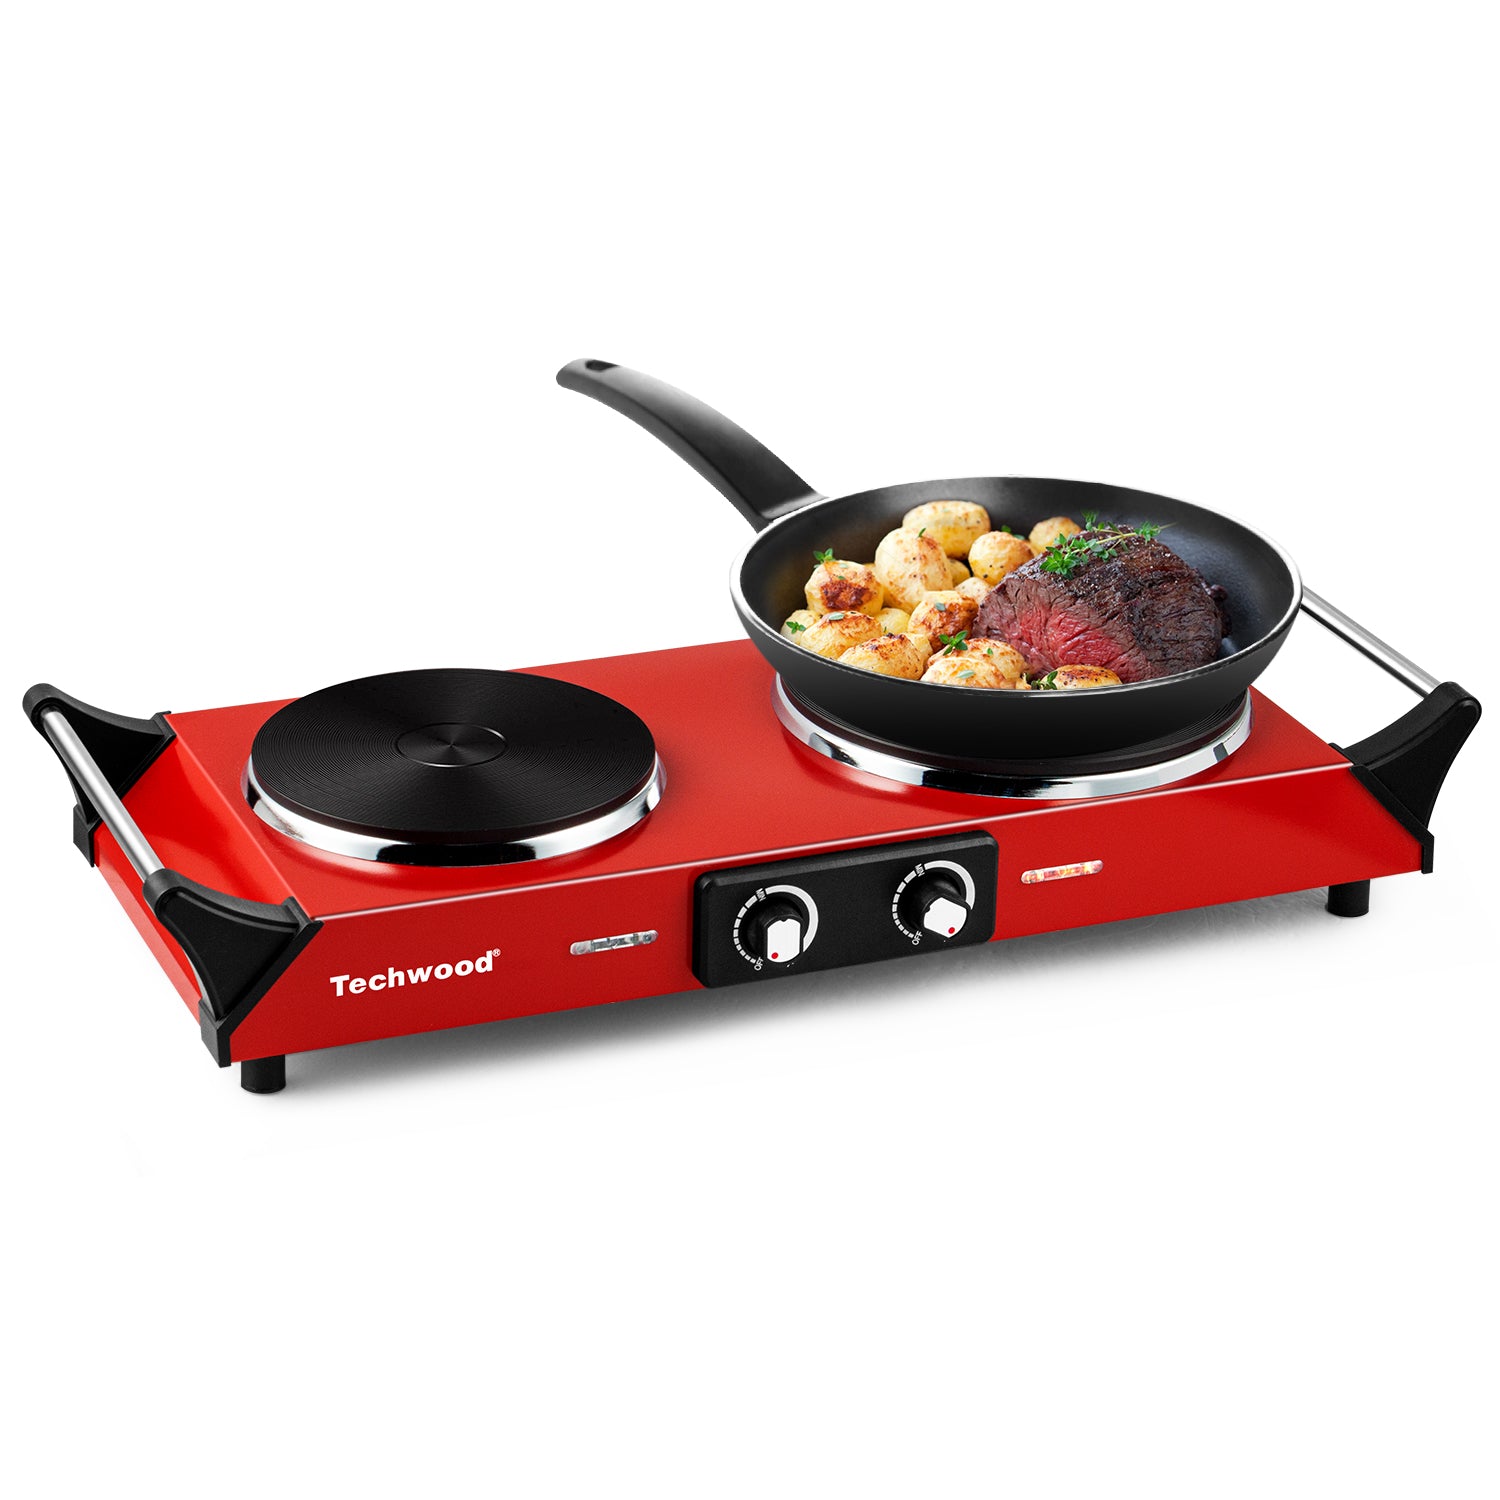 Cusimax Double Hot Plate For Cooking,stainless Steel Electric